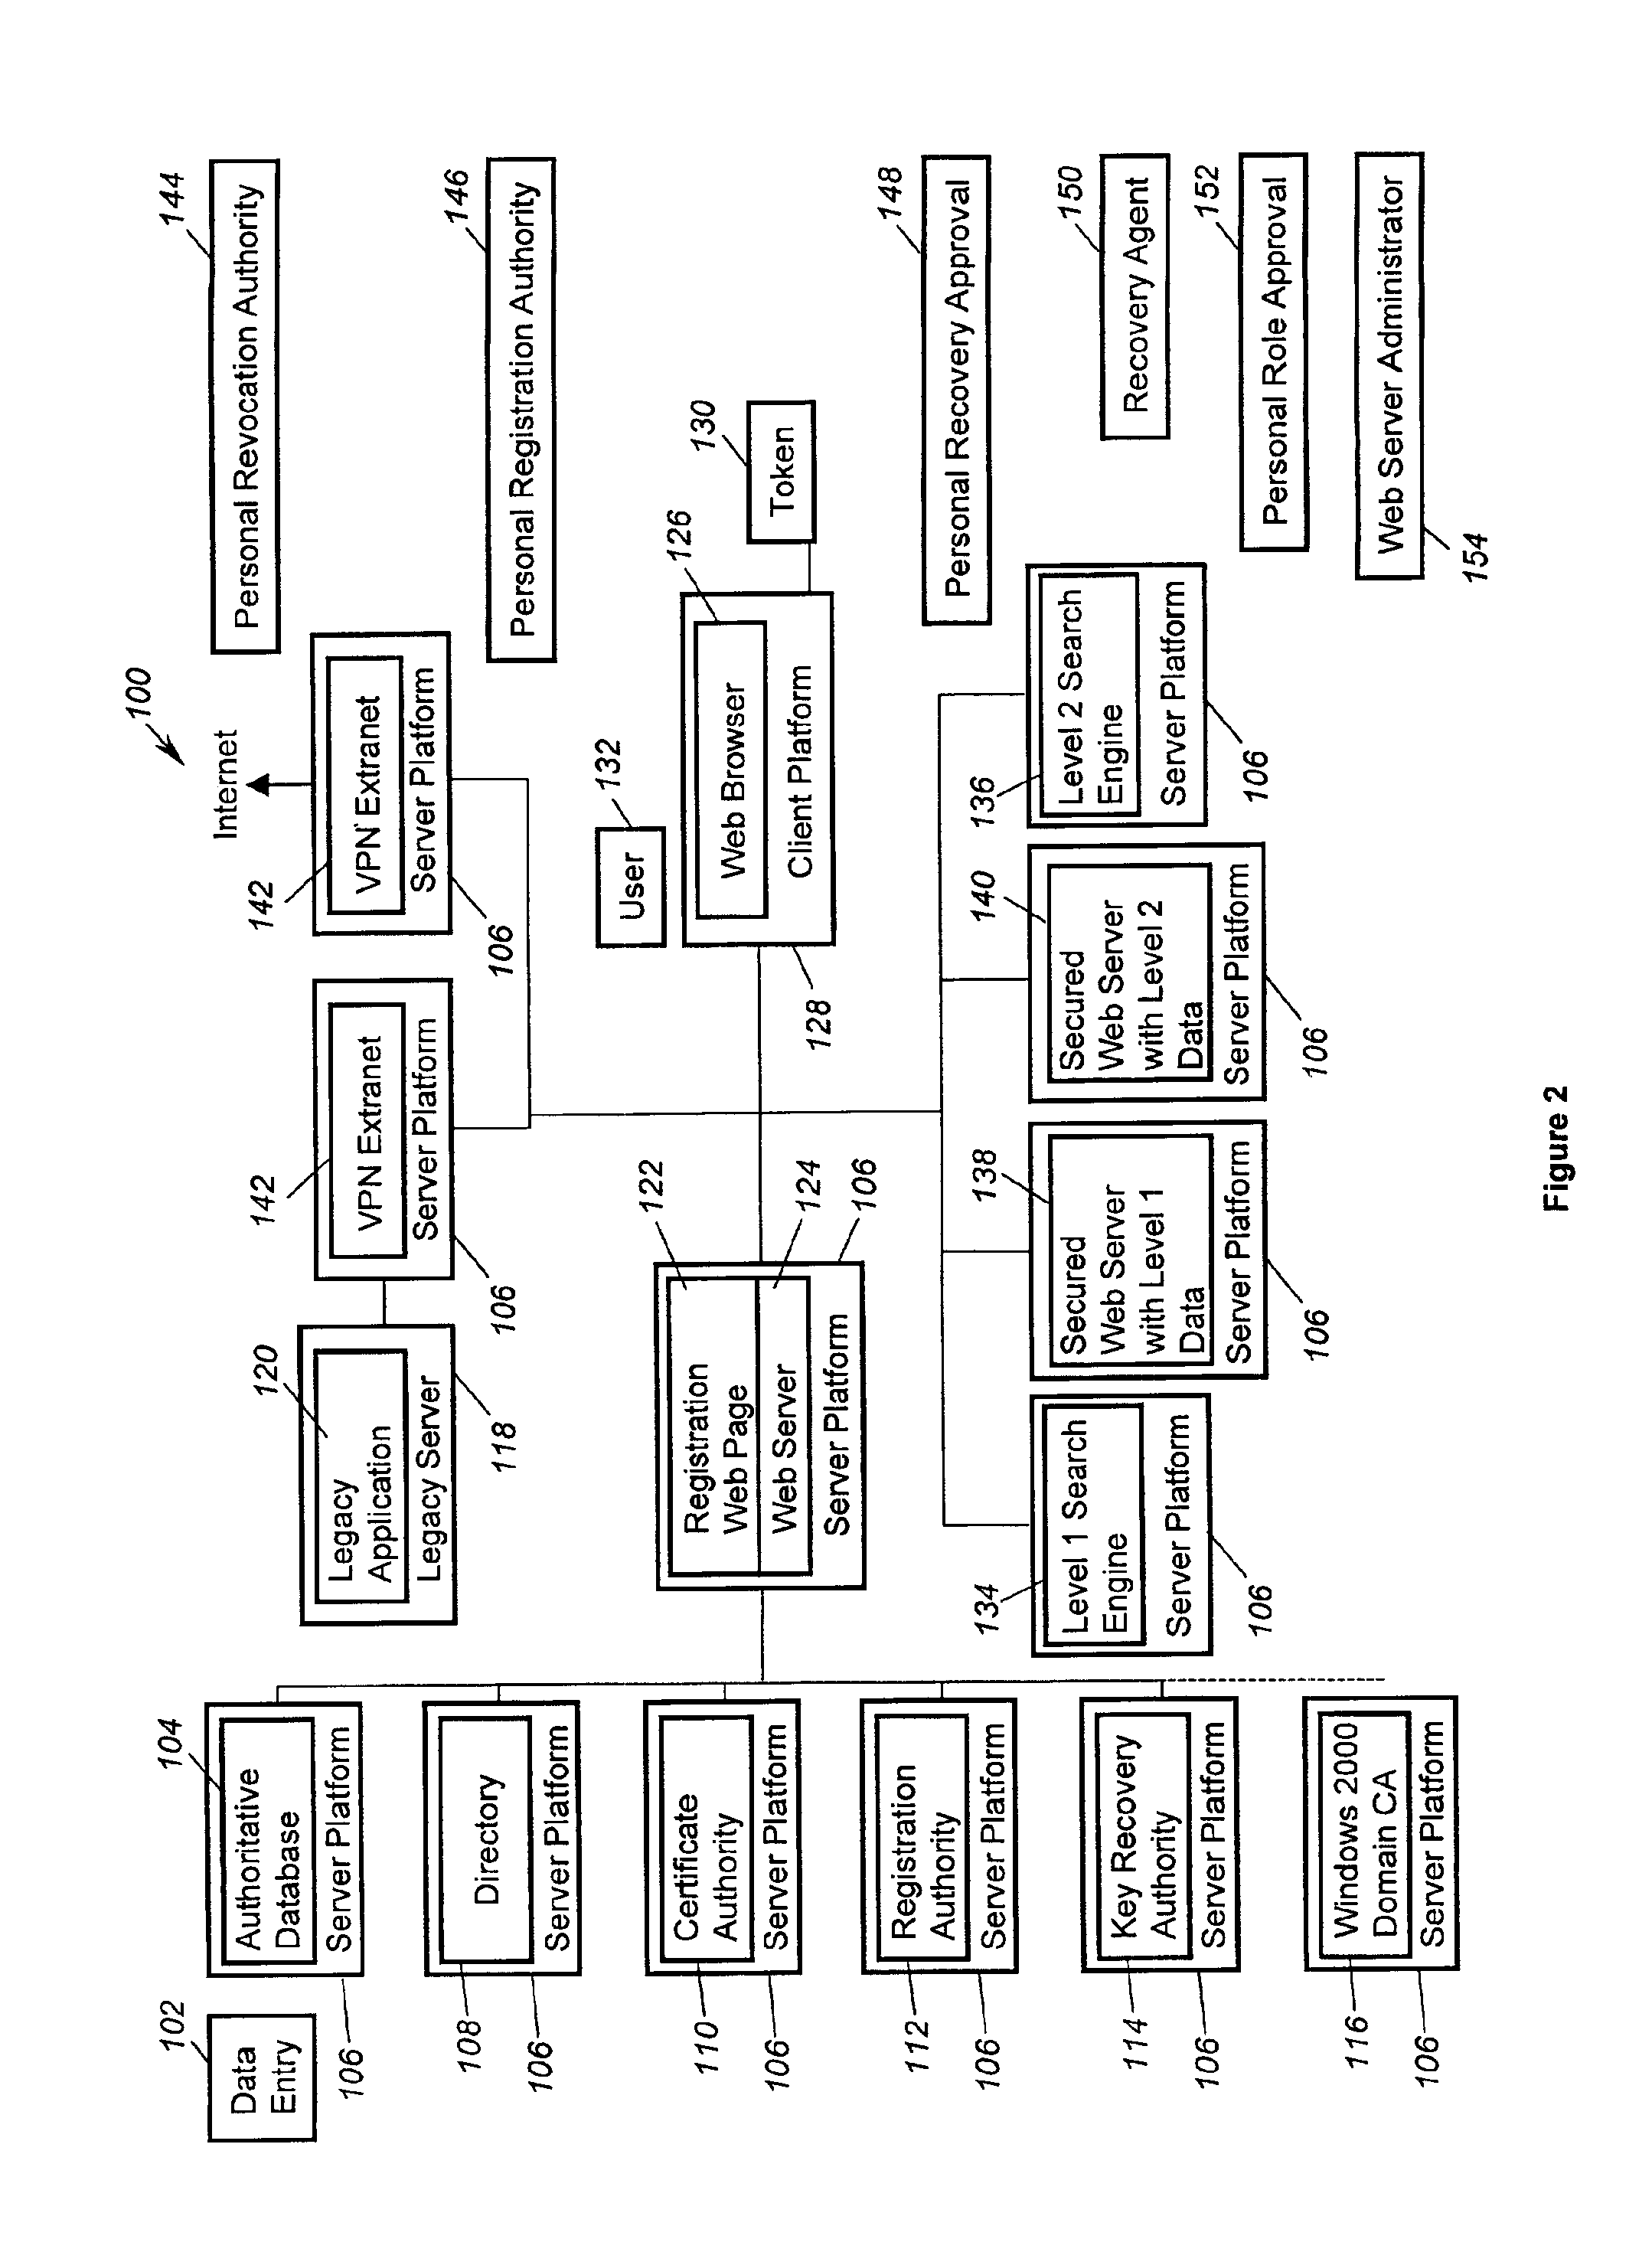 System and method for secure legacy enclaves in a public key infrastructure